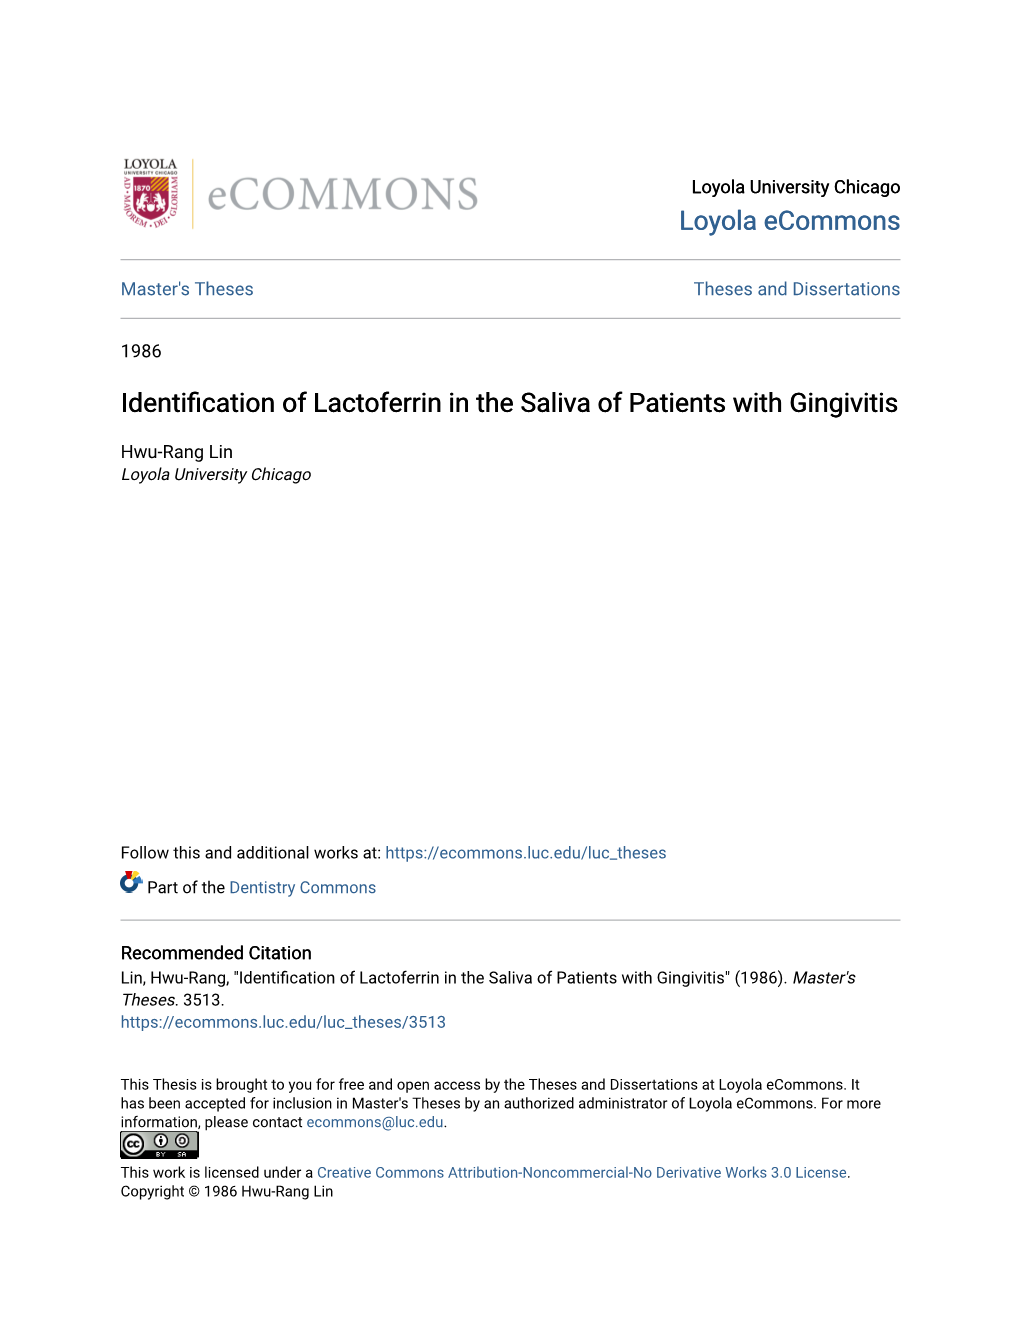 Identification of Lactoferrin in the Saliva of Patients with Gingivitis